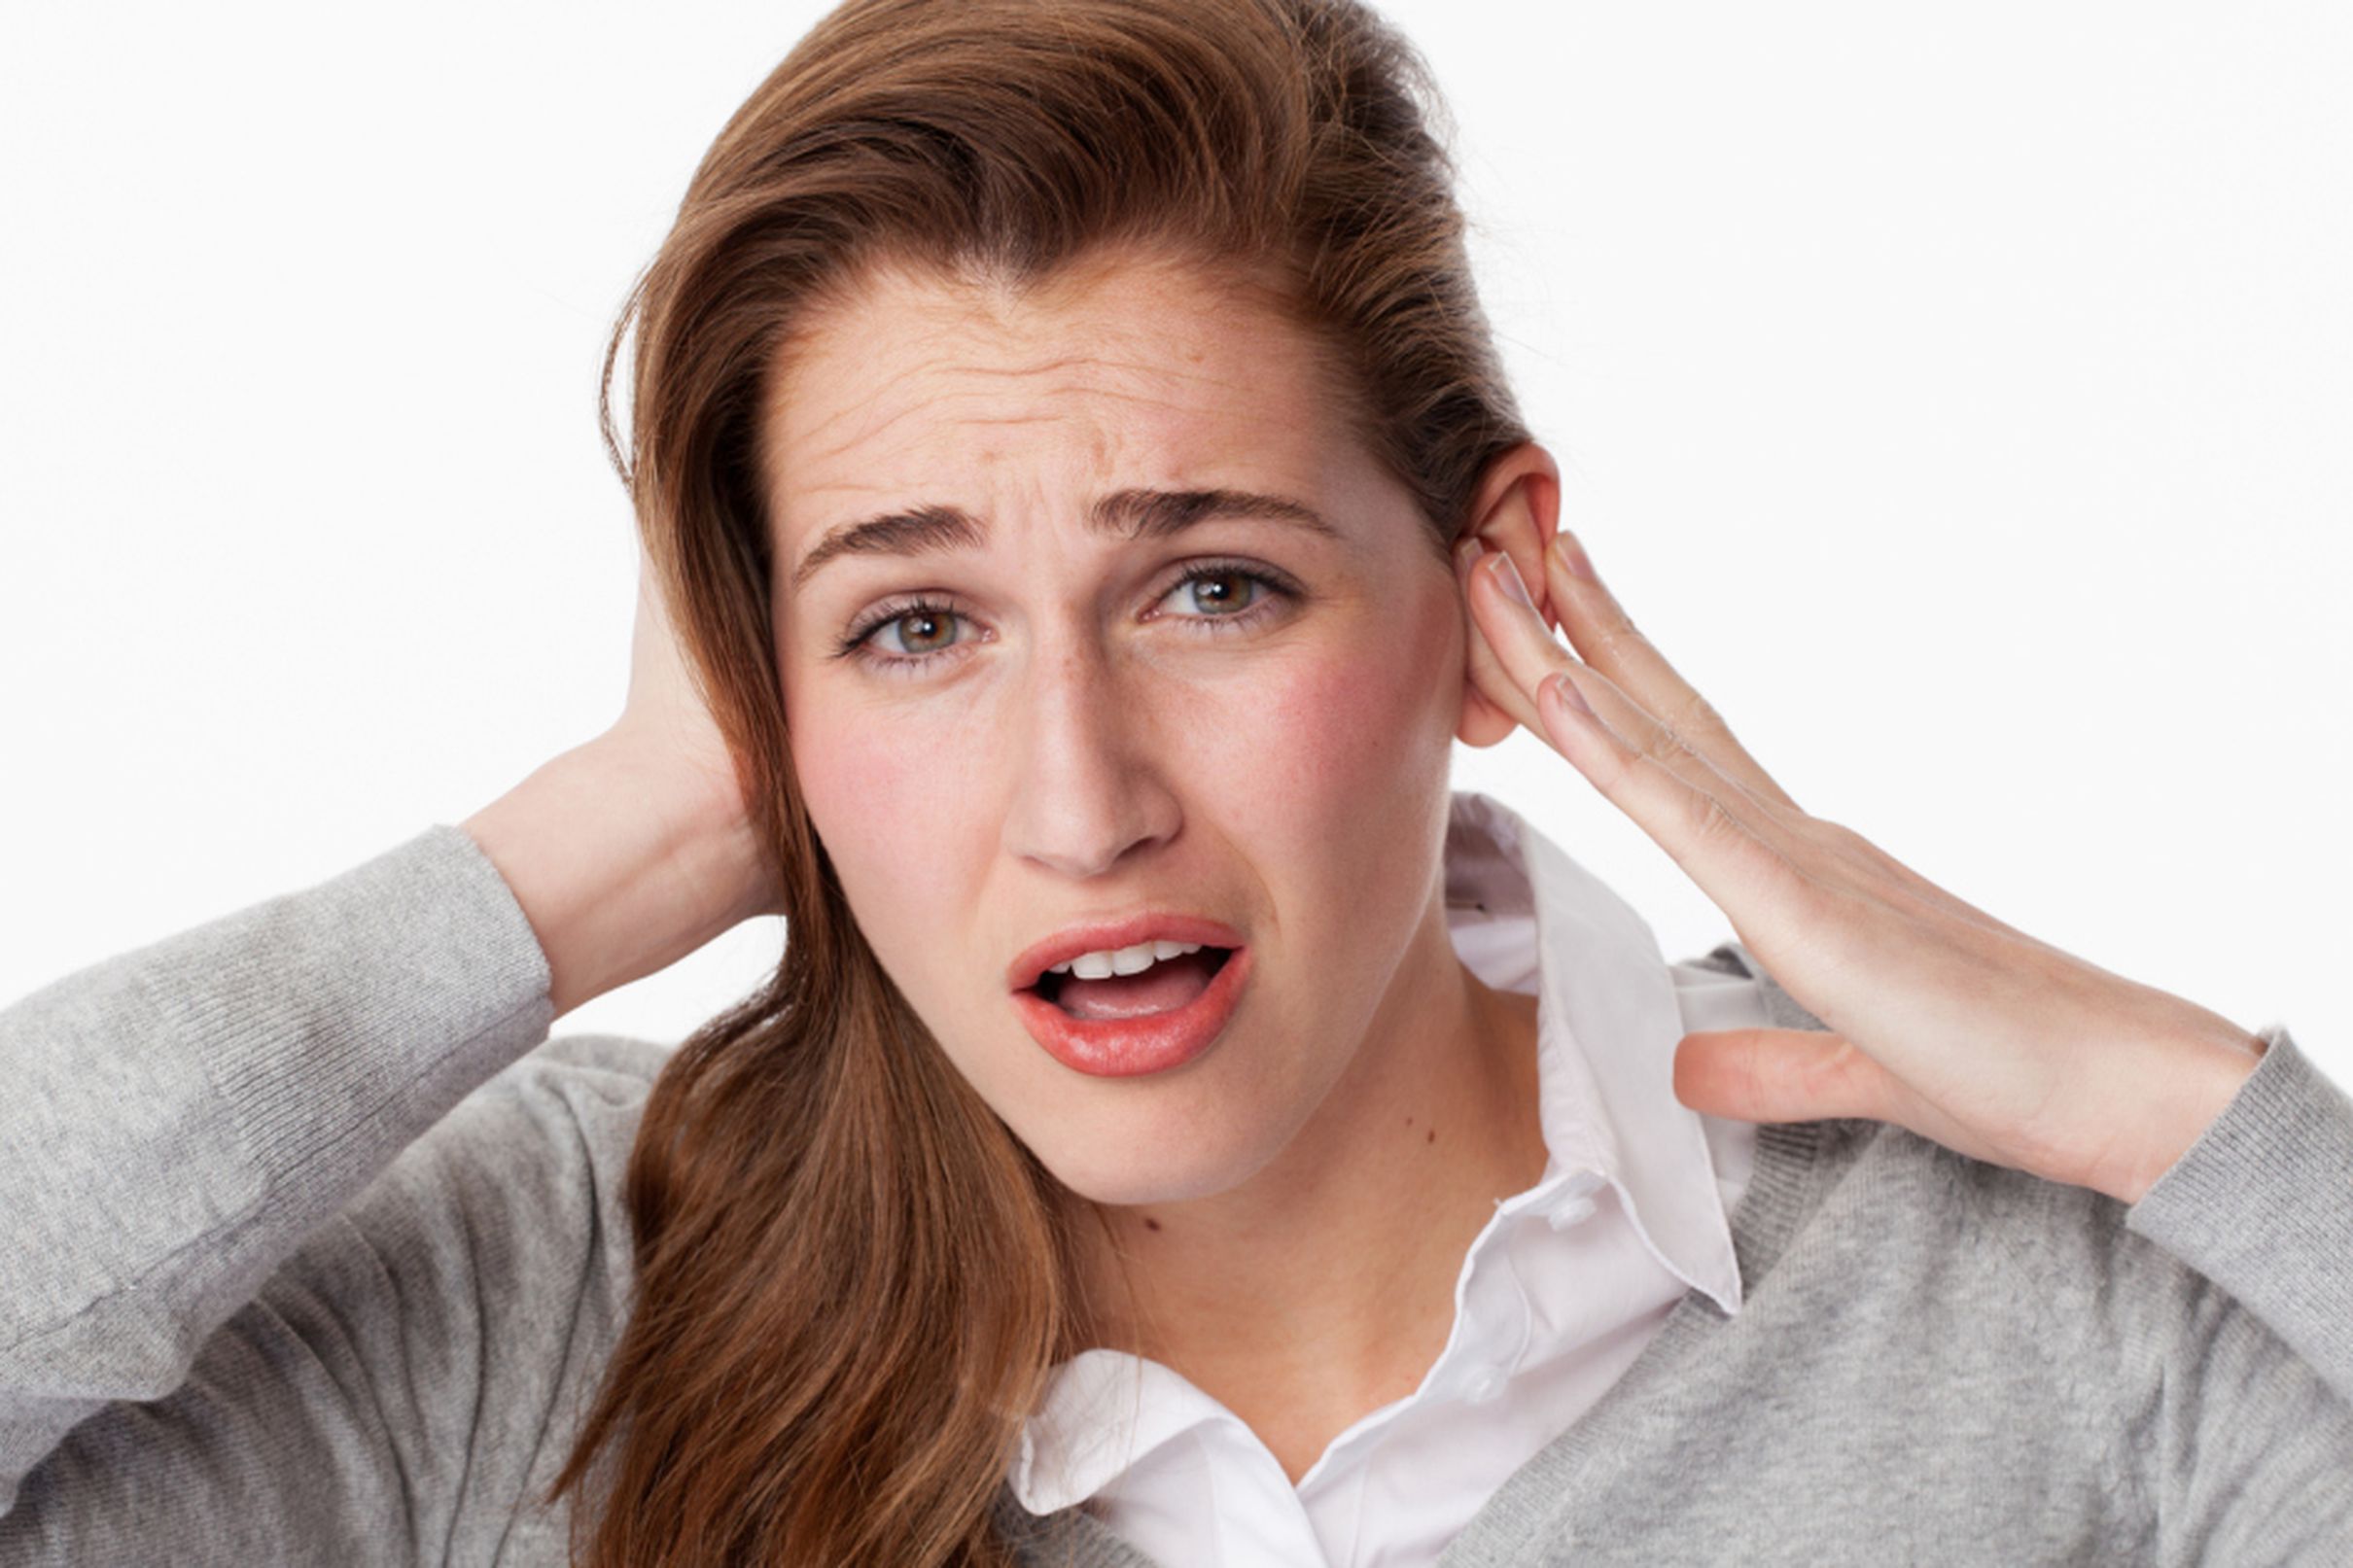 Ask the Doctors: Tinnitus a symptom of underlying problem ...